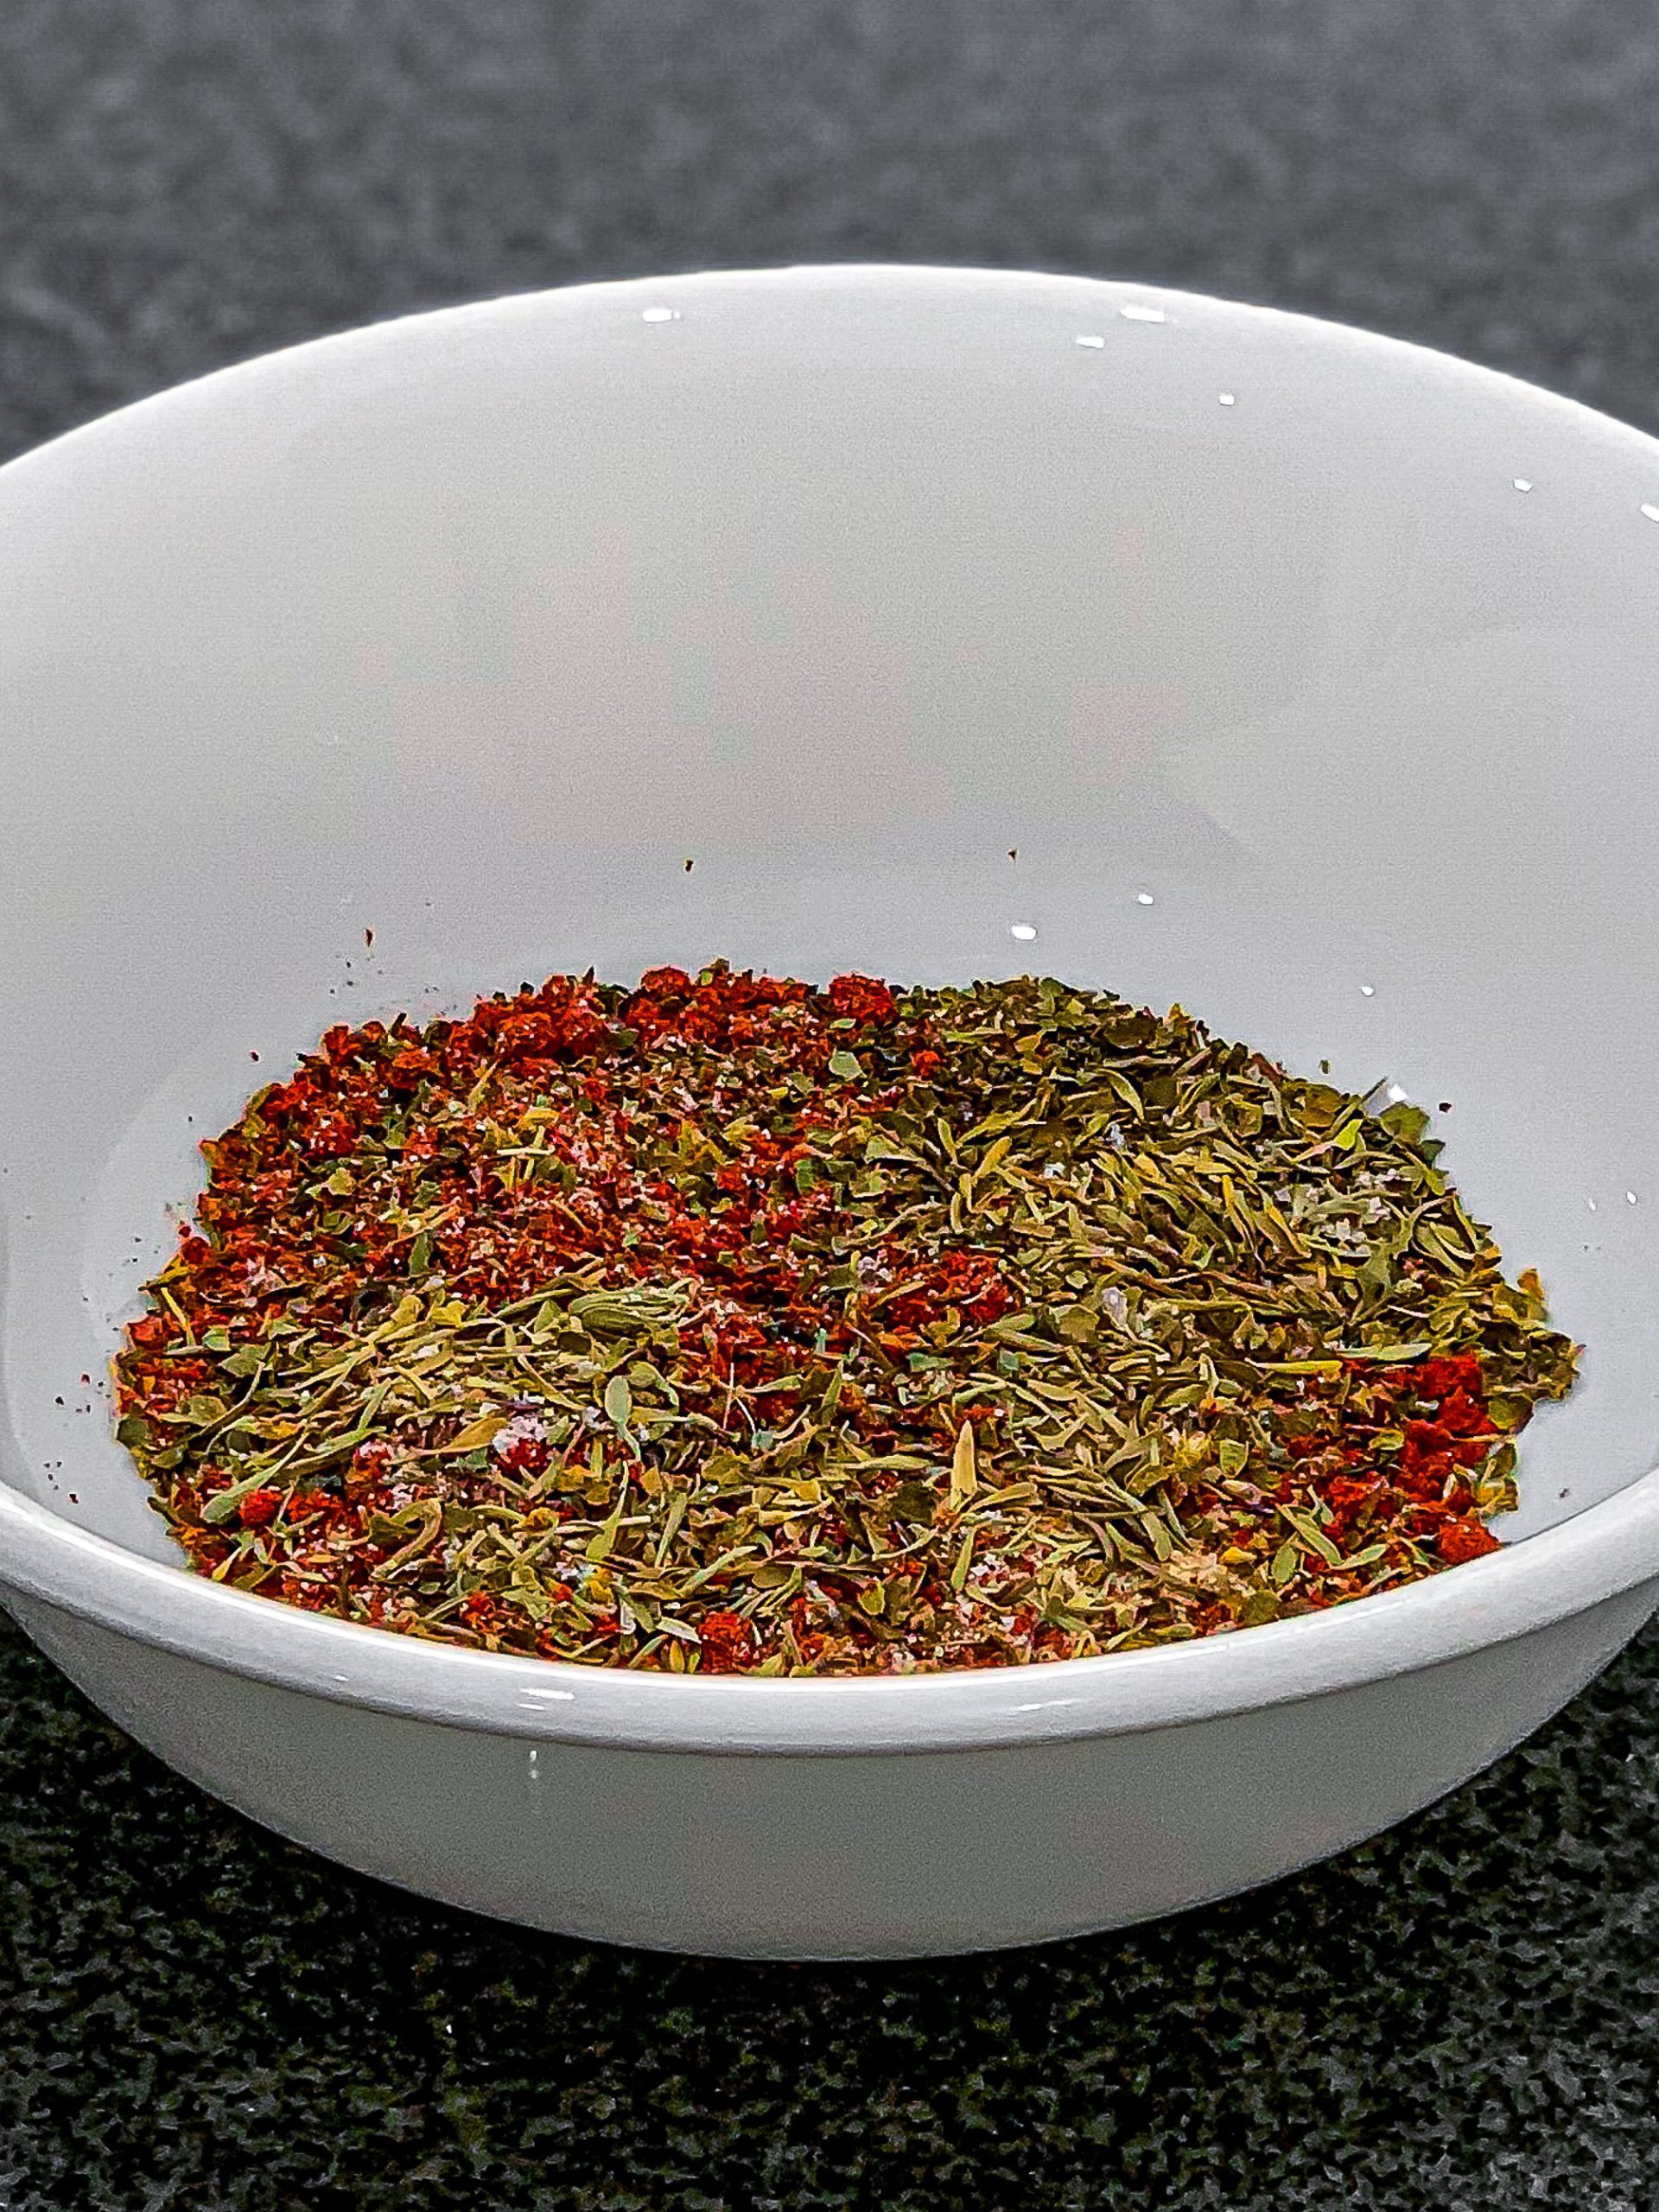 Add dried basil, dried thyme, dried oregano, paprika, onion powder, salt, and pepper in a small bowl and mix well.